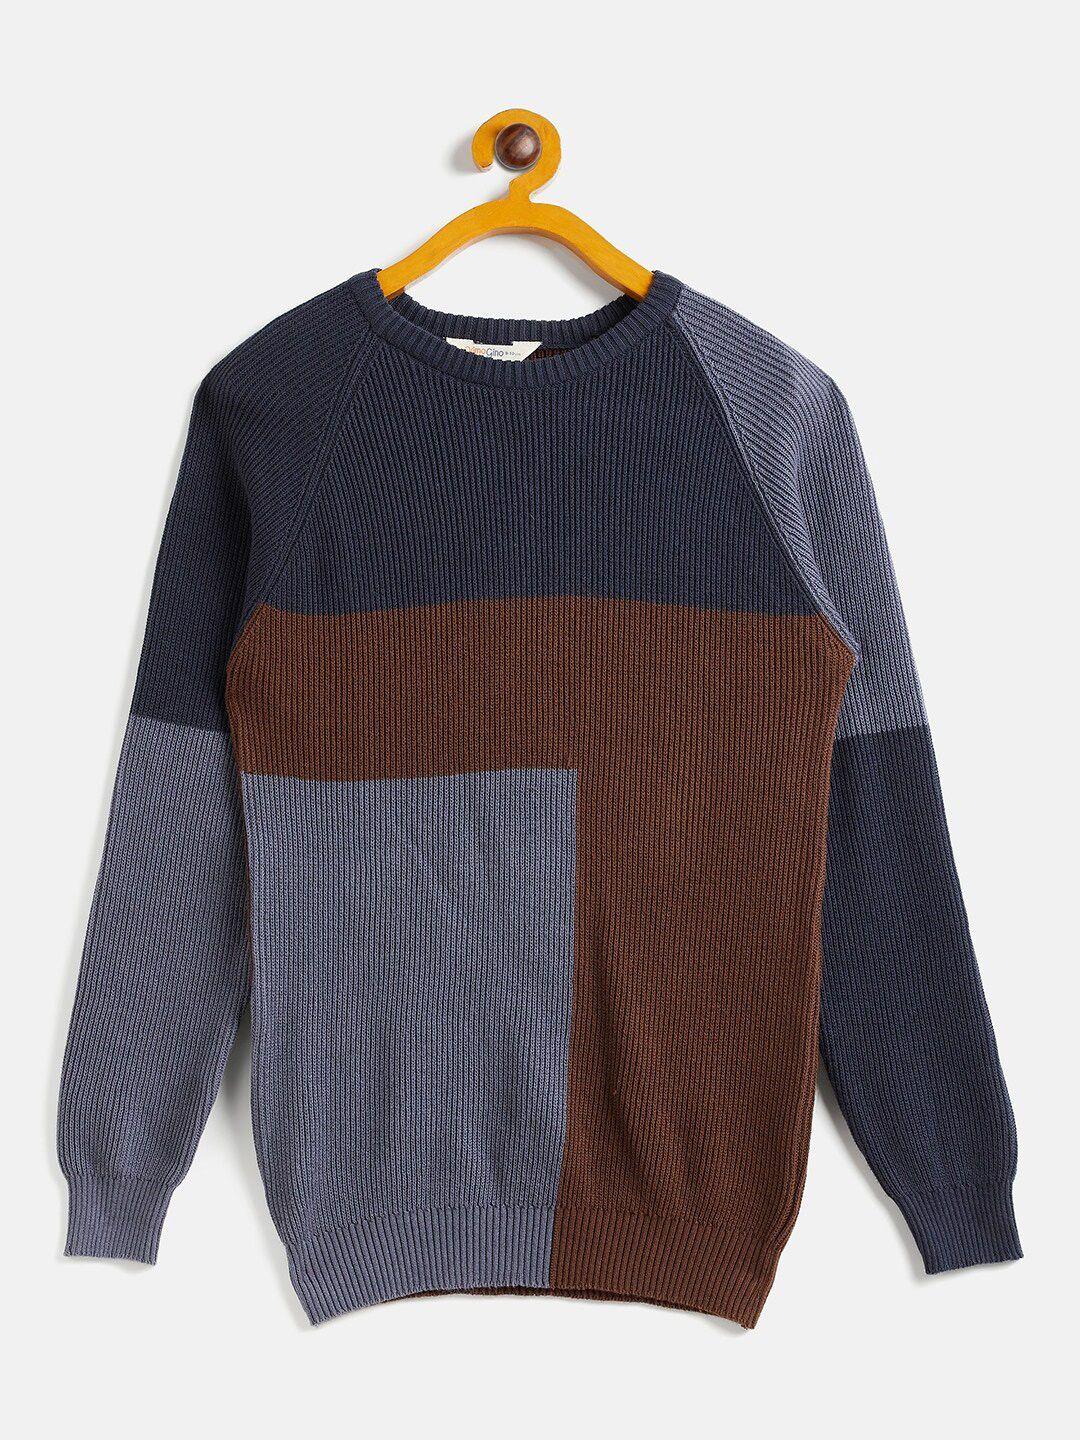 jwaaq-boys-colourblocked-round-neck-long-sleeves-cotton-pullover-sweater